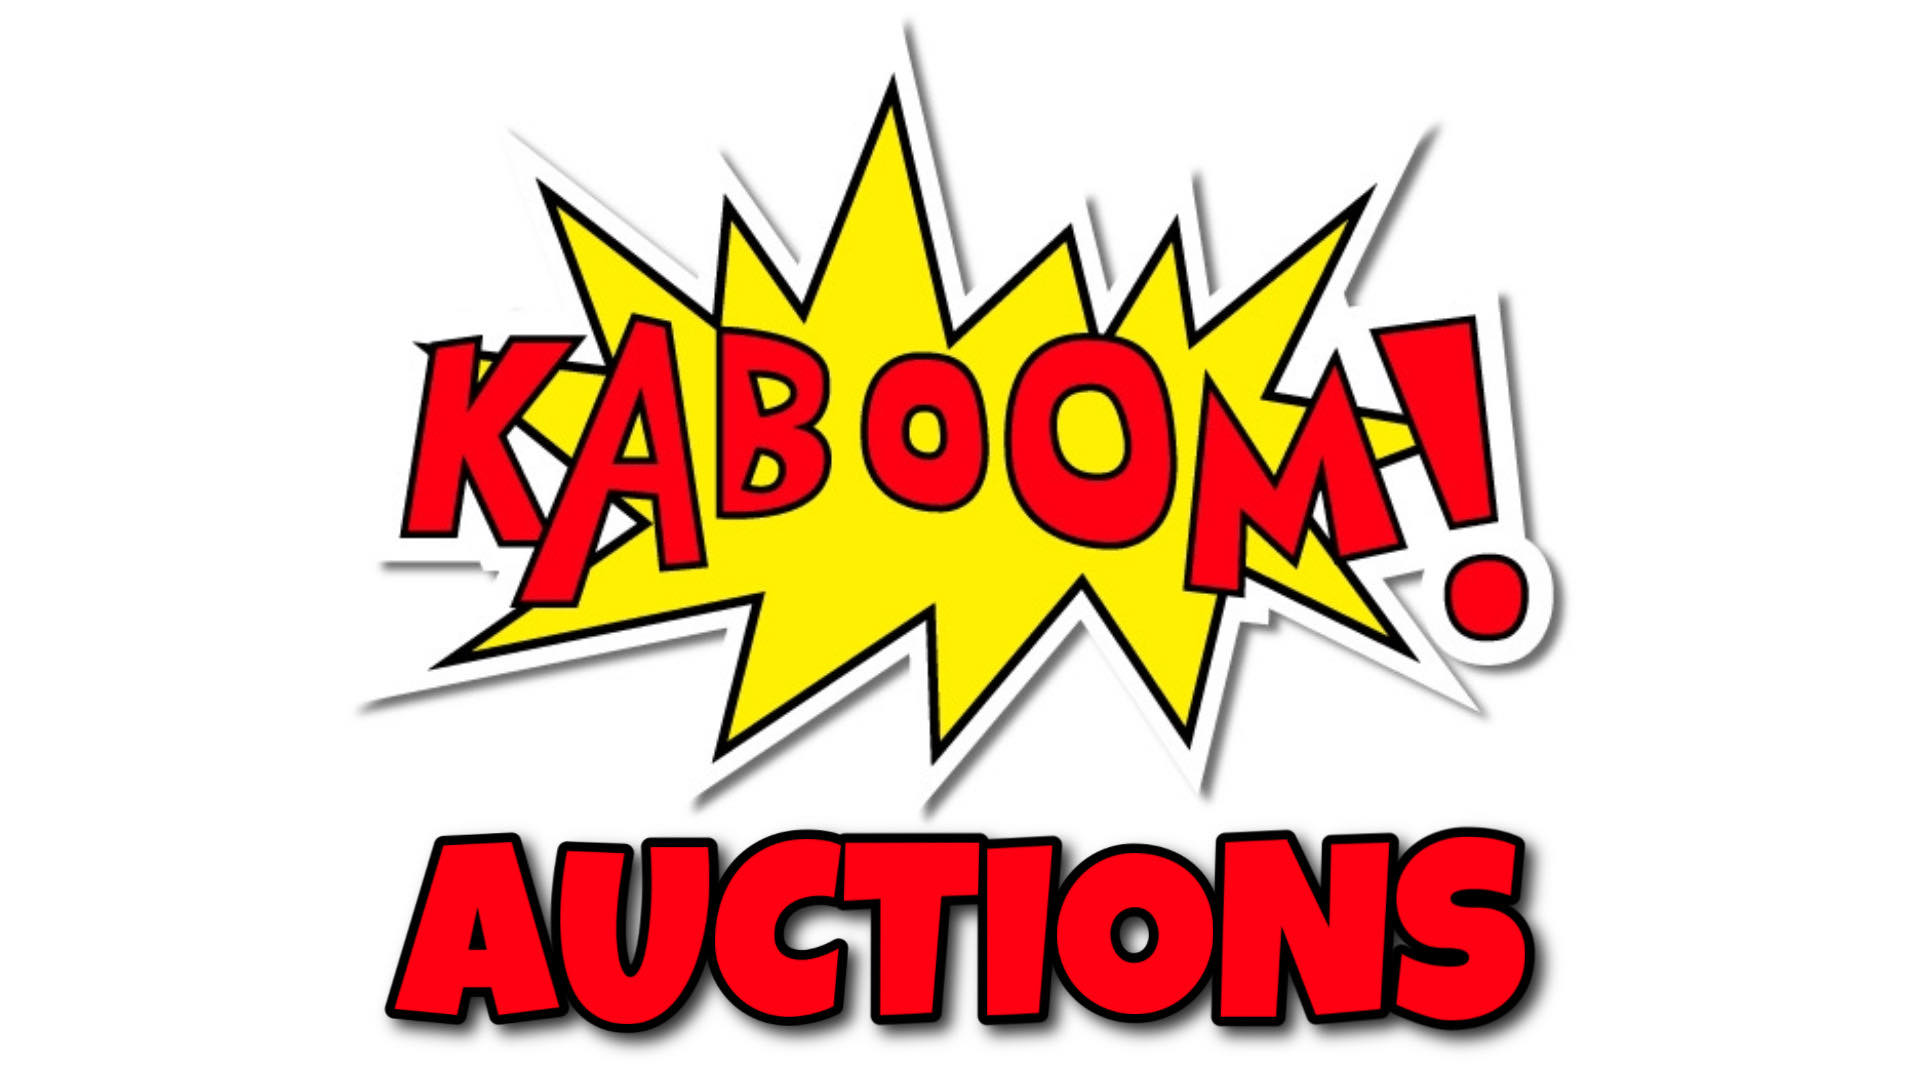 Kaboom Auctions